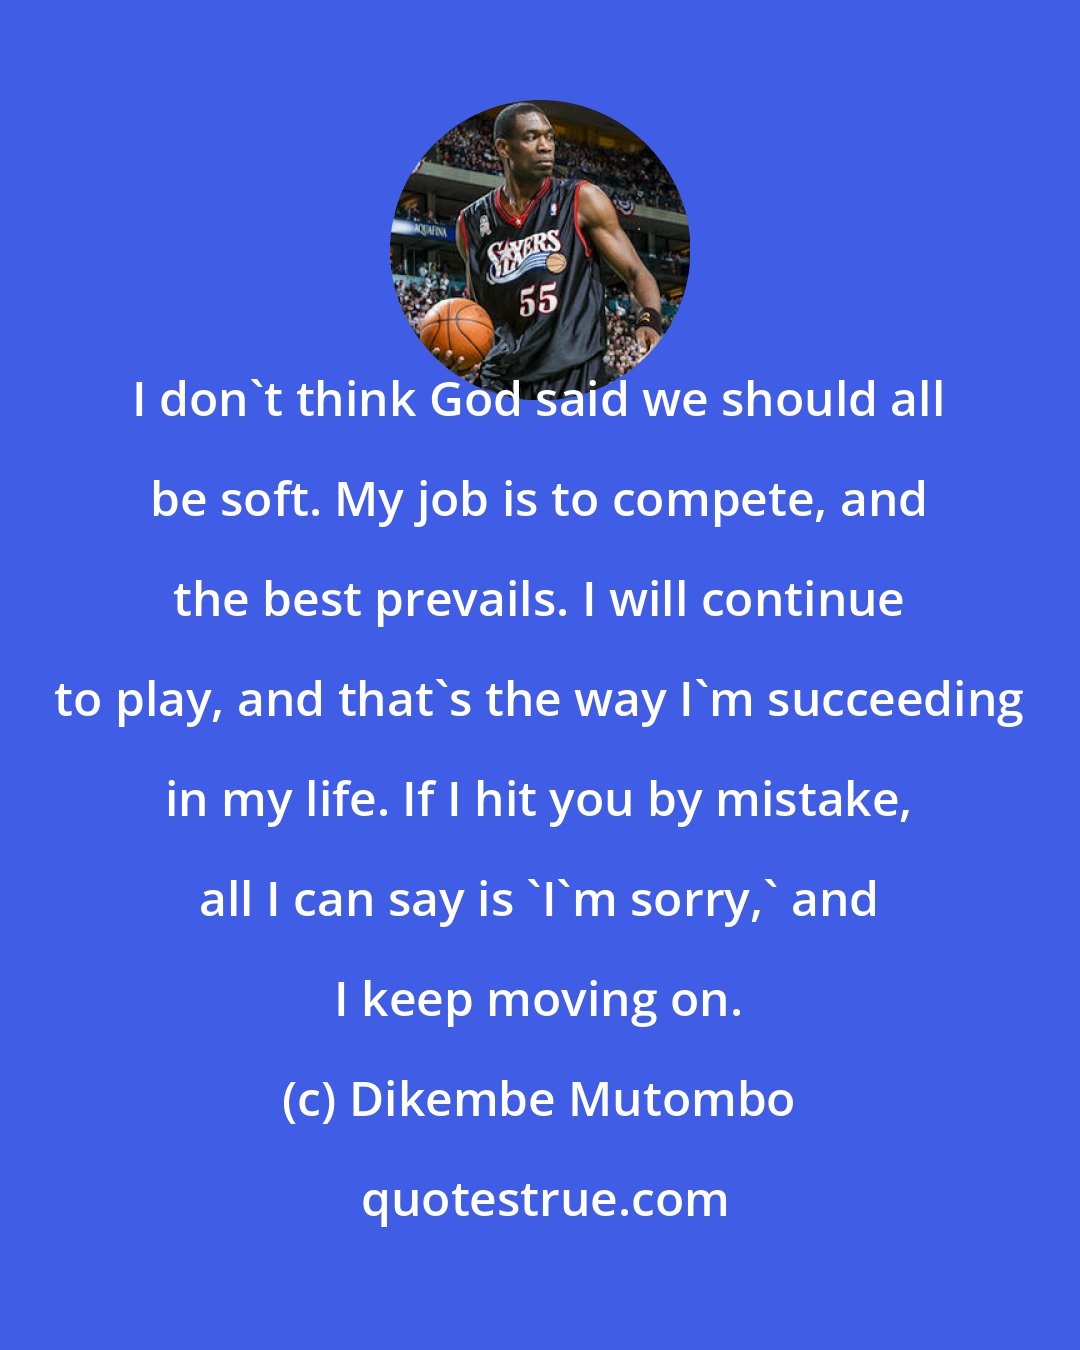 Dikembe Mutombo: I don't think God said we should all be soft. My job is to compete, and the best prevails. I will continue to play, and that's the way I'm succeeding in my life. If I hit you by mistake, all I can say is 'I'm sorry,' and I keep moving on.